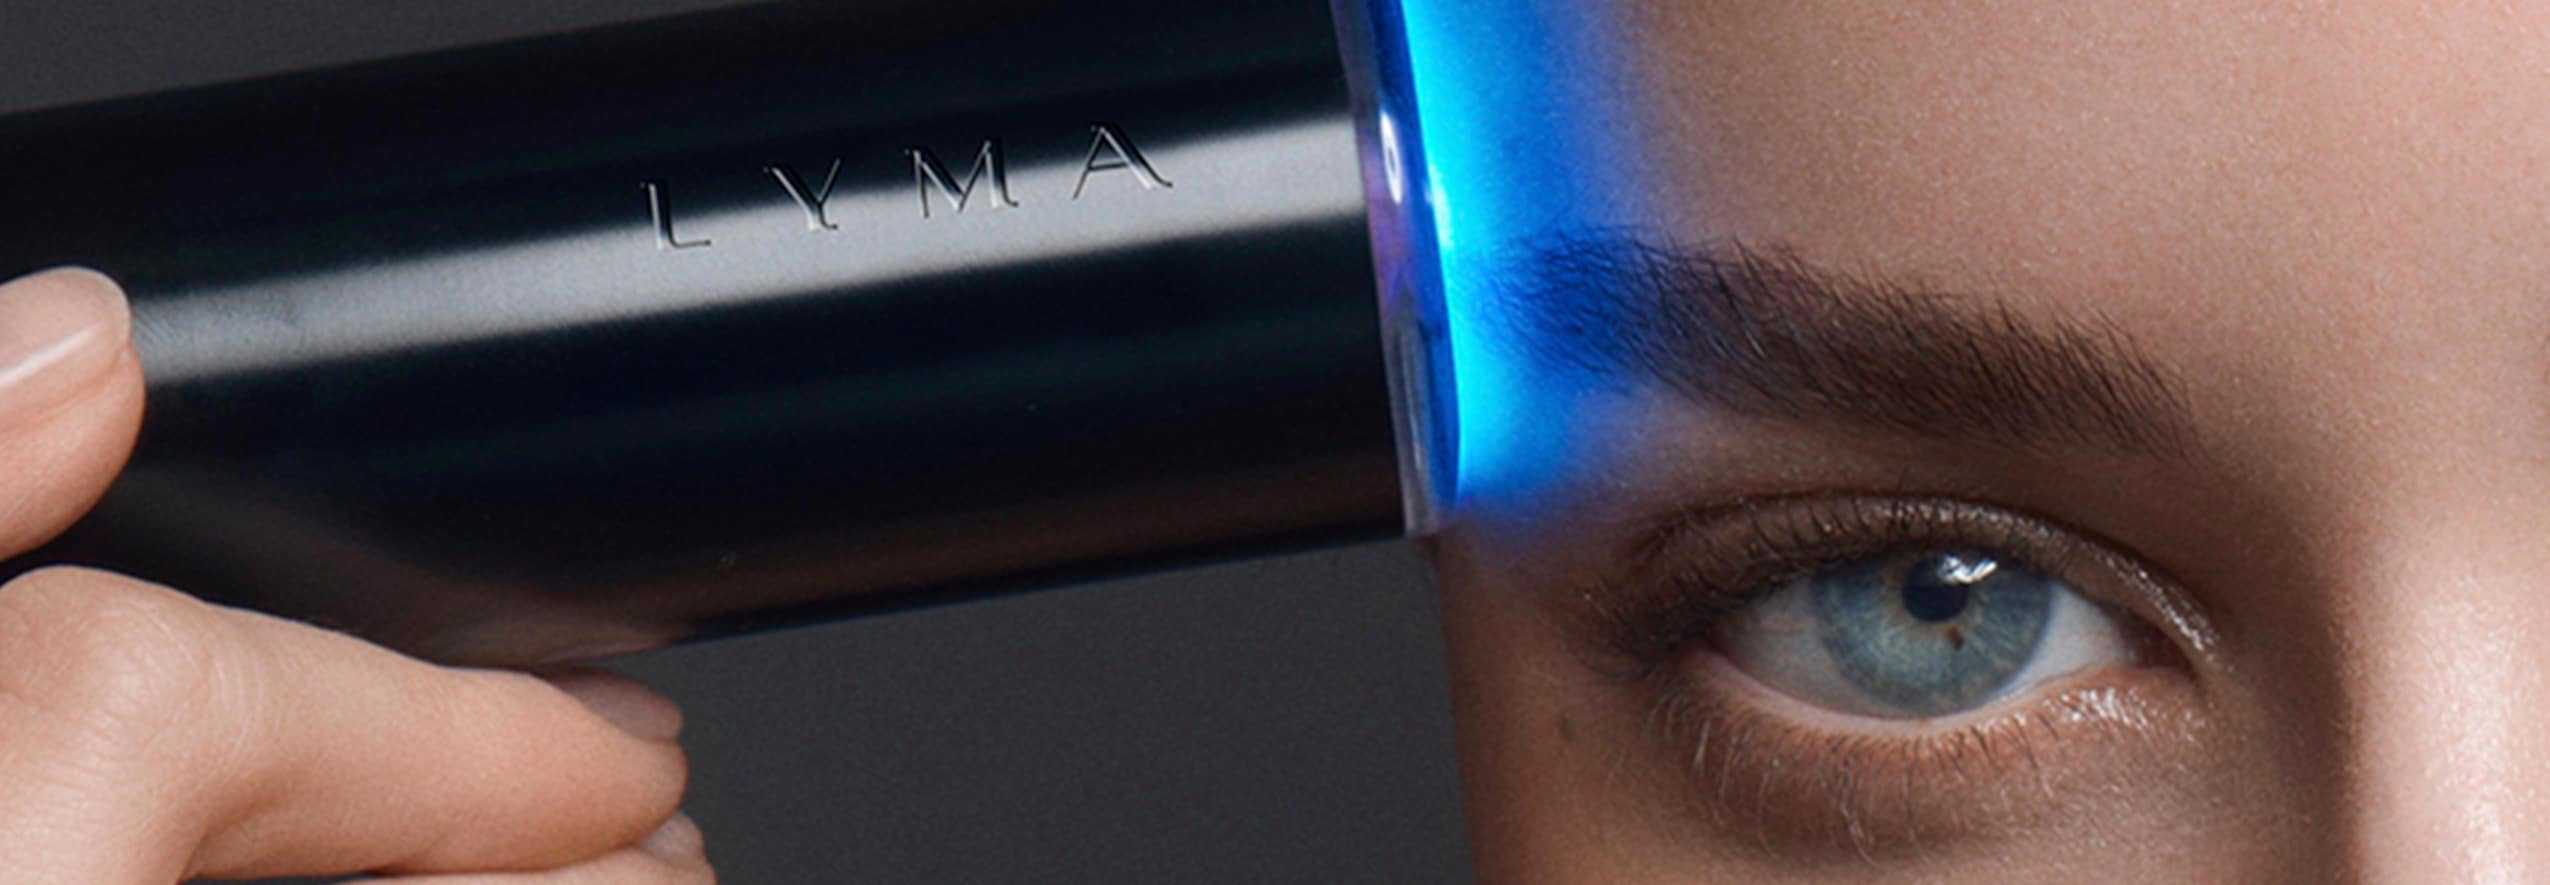 Lady holds laser above the eye area